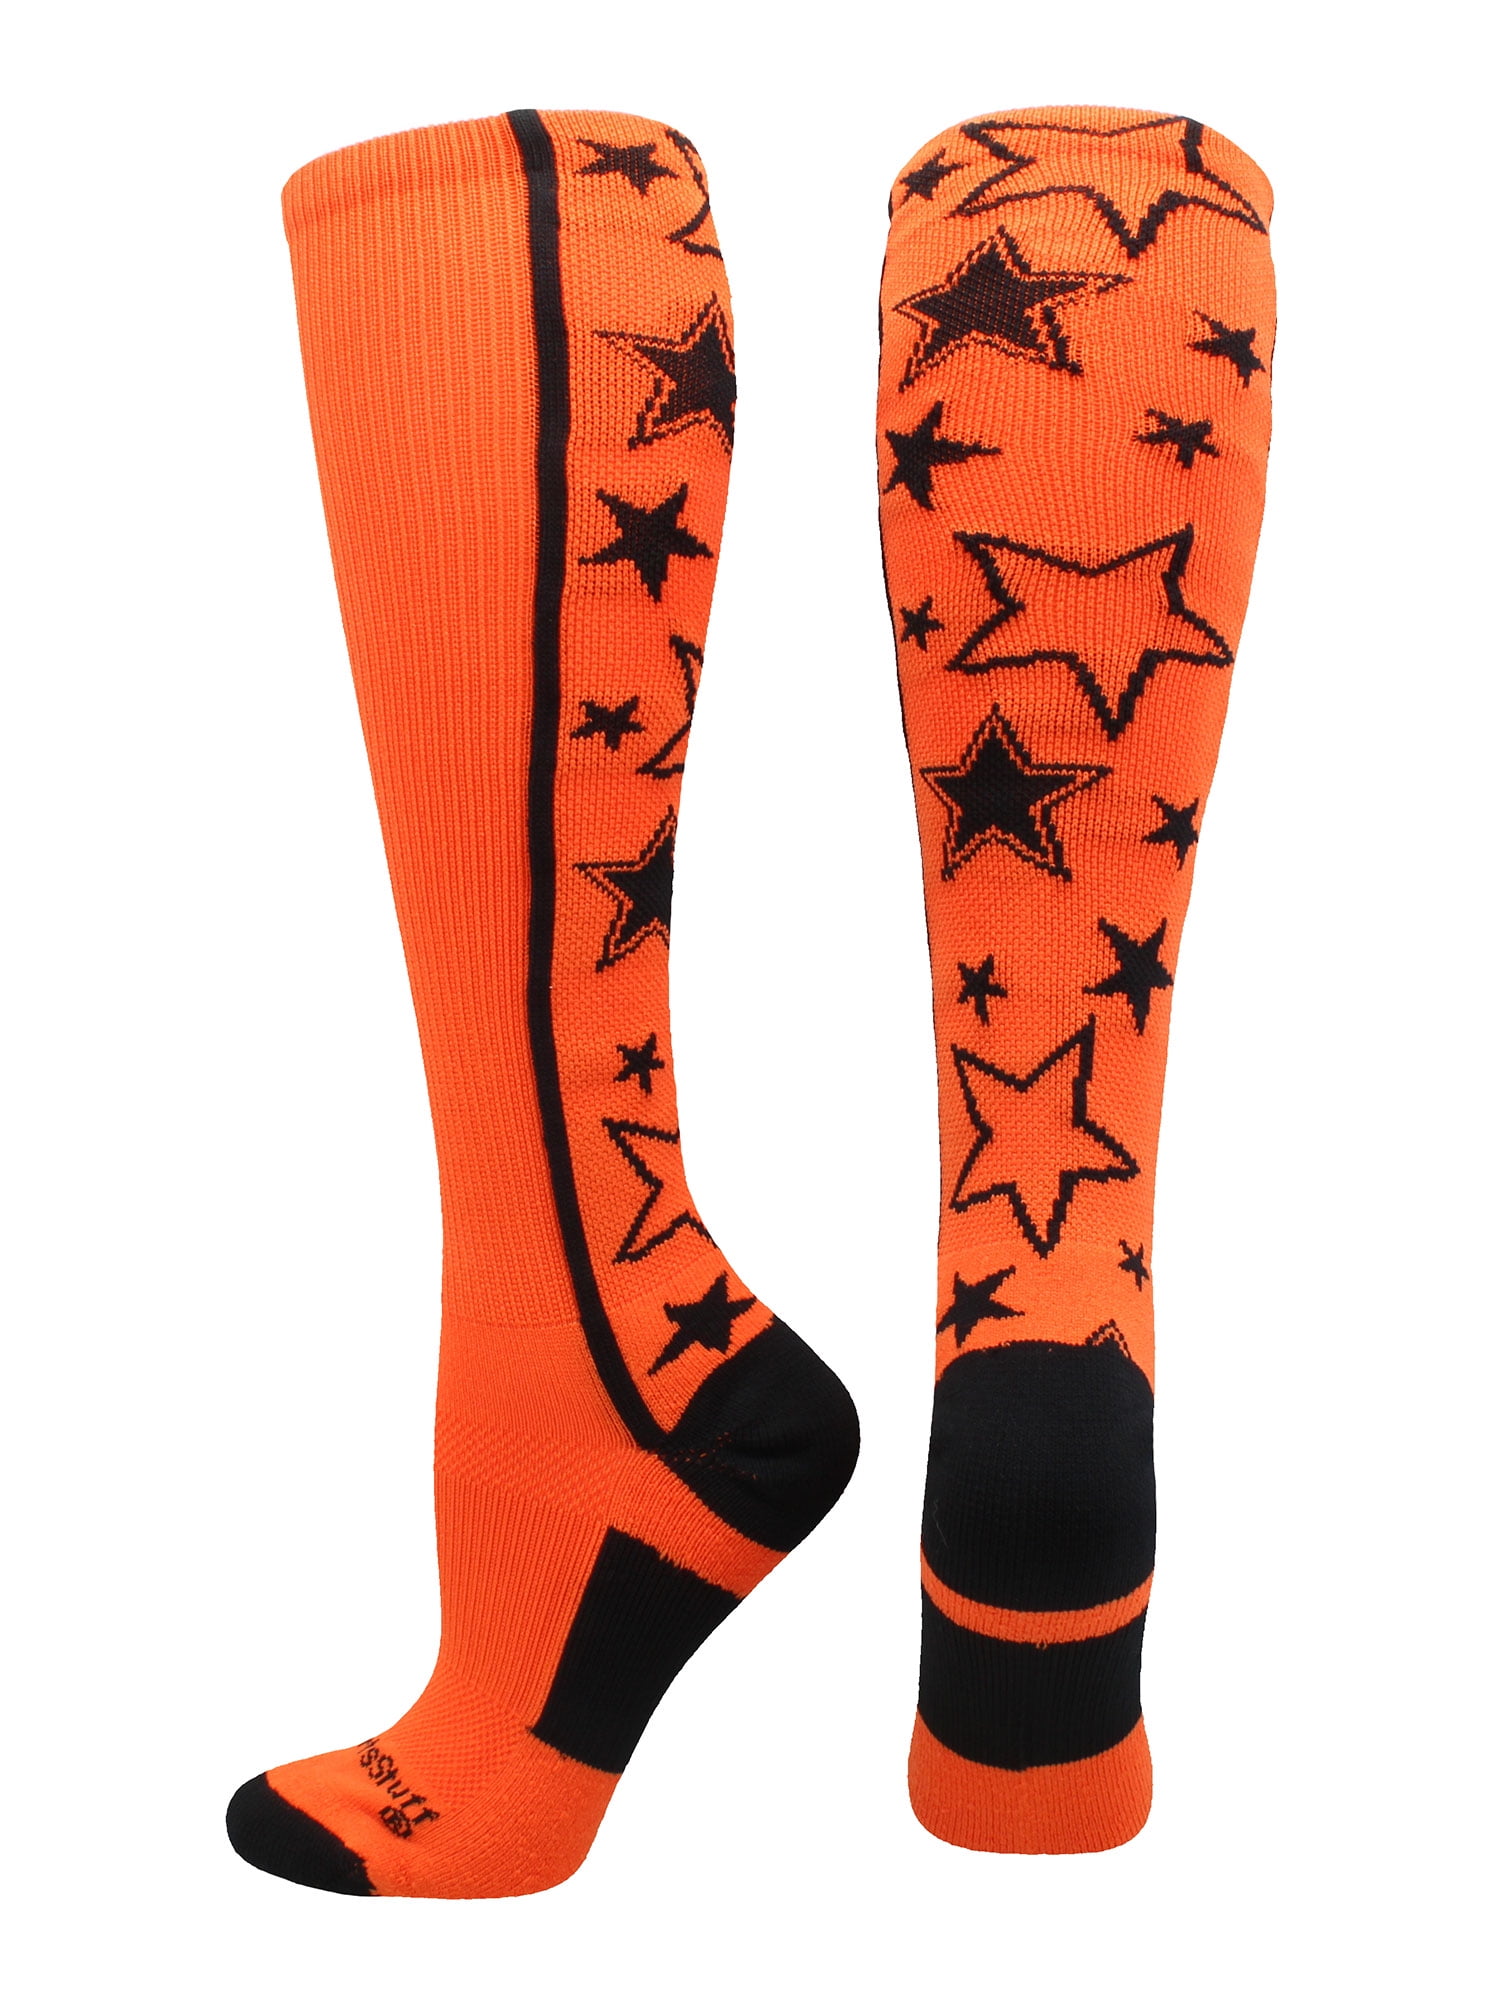 Multiple Colors MadSportsStuff Crazy Socks with Stars Over The Calf Socks